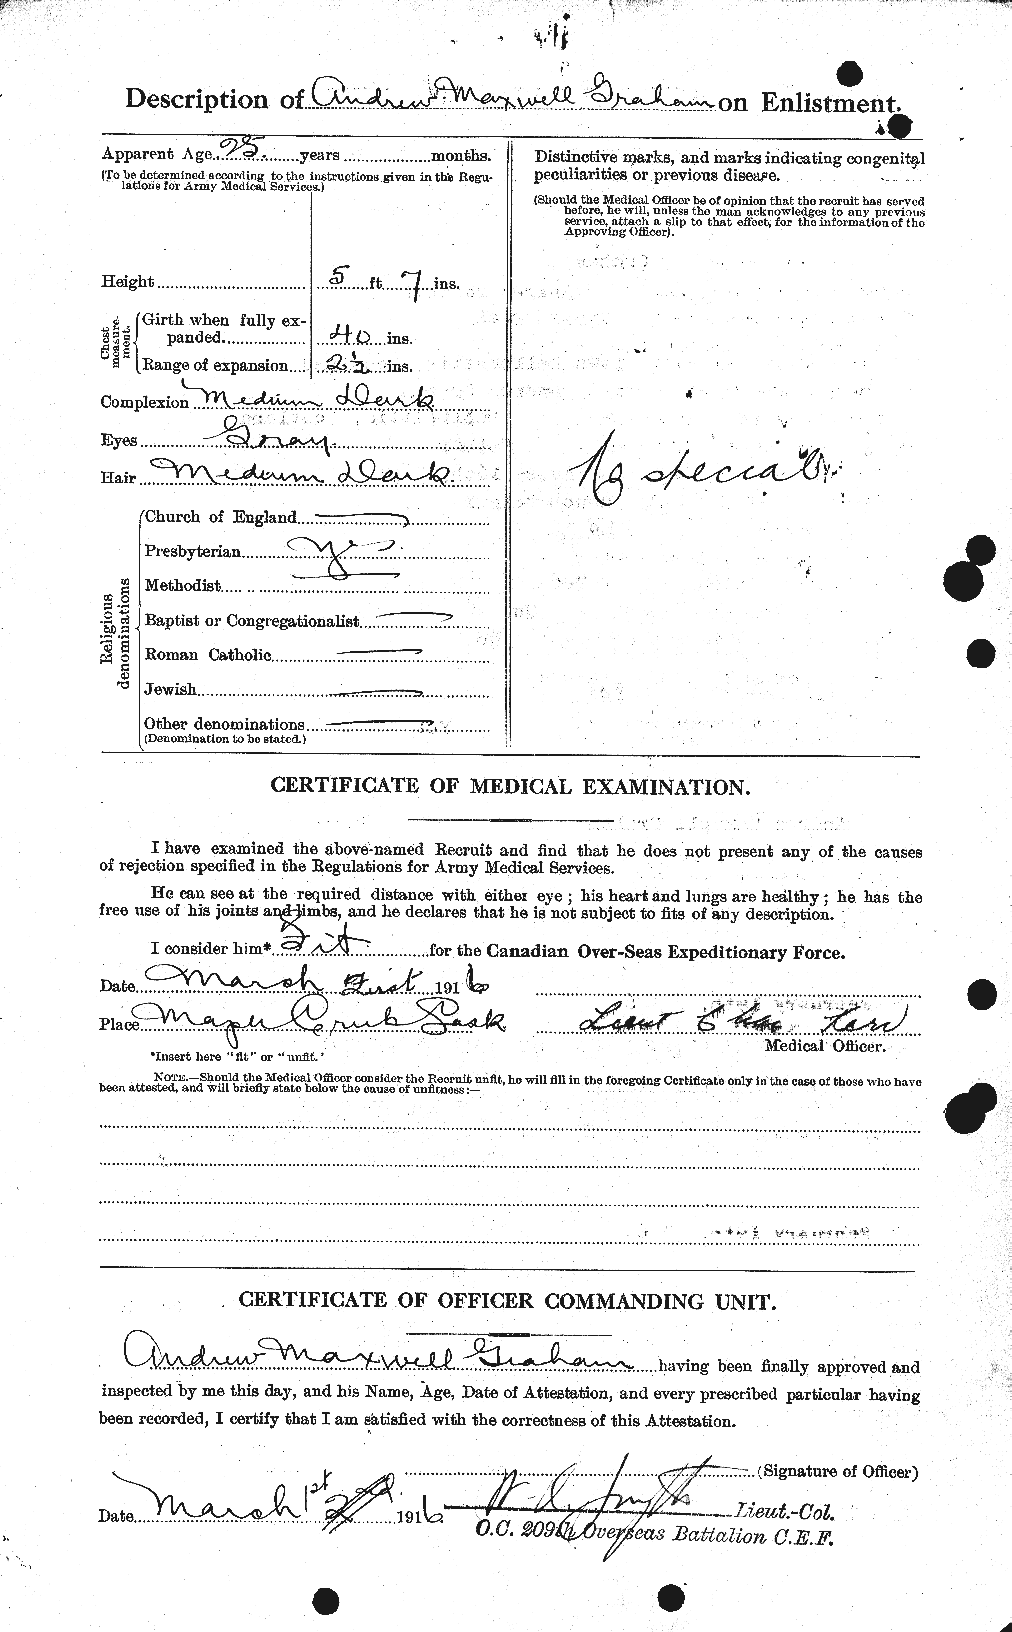 Personnel Records of the First World War - CEF 359617b